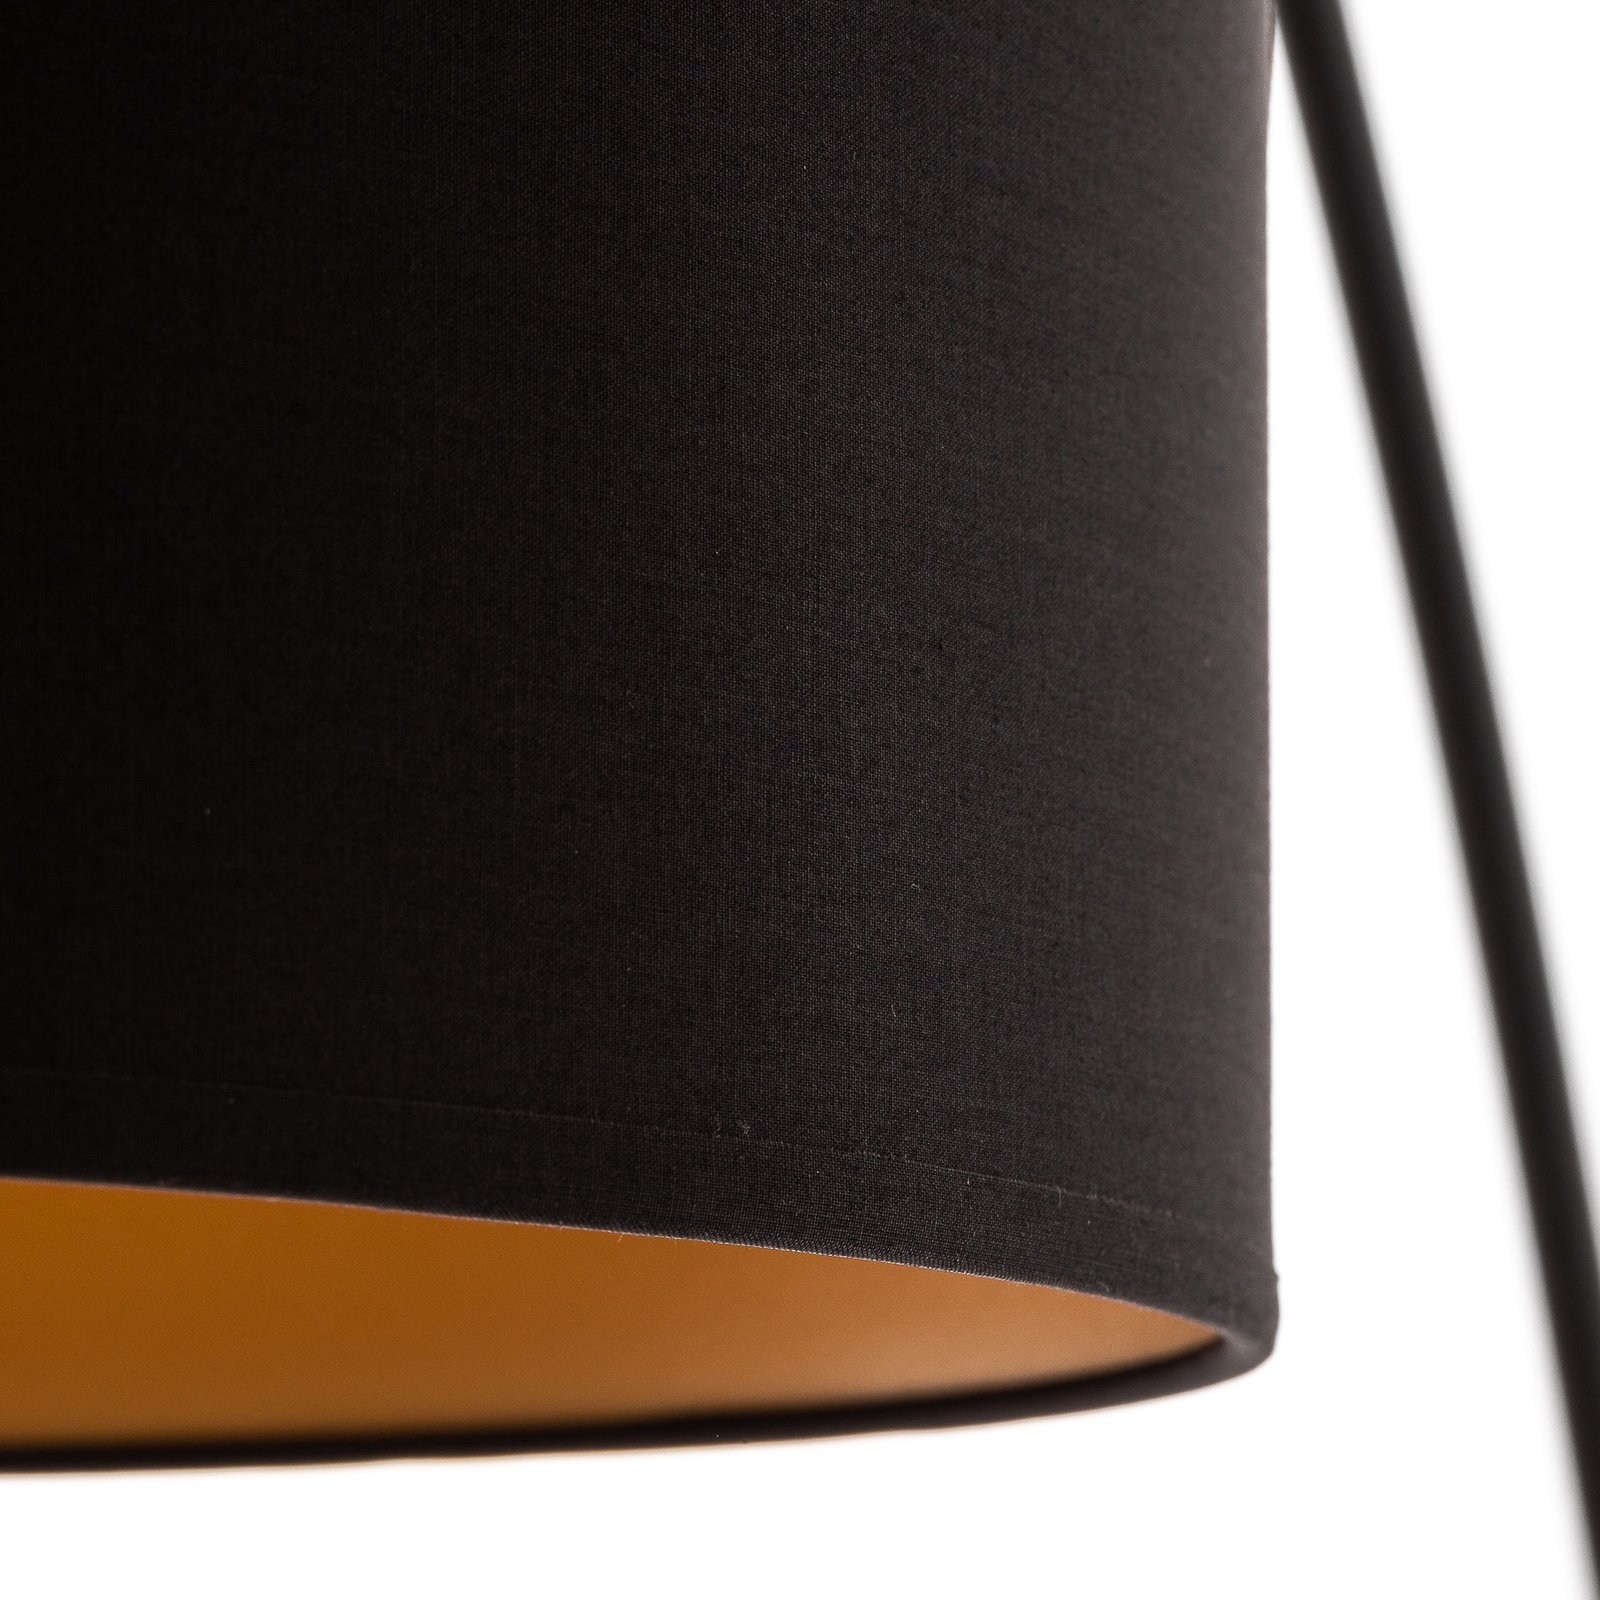 Alice arc lamp with black and gold lampshade